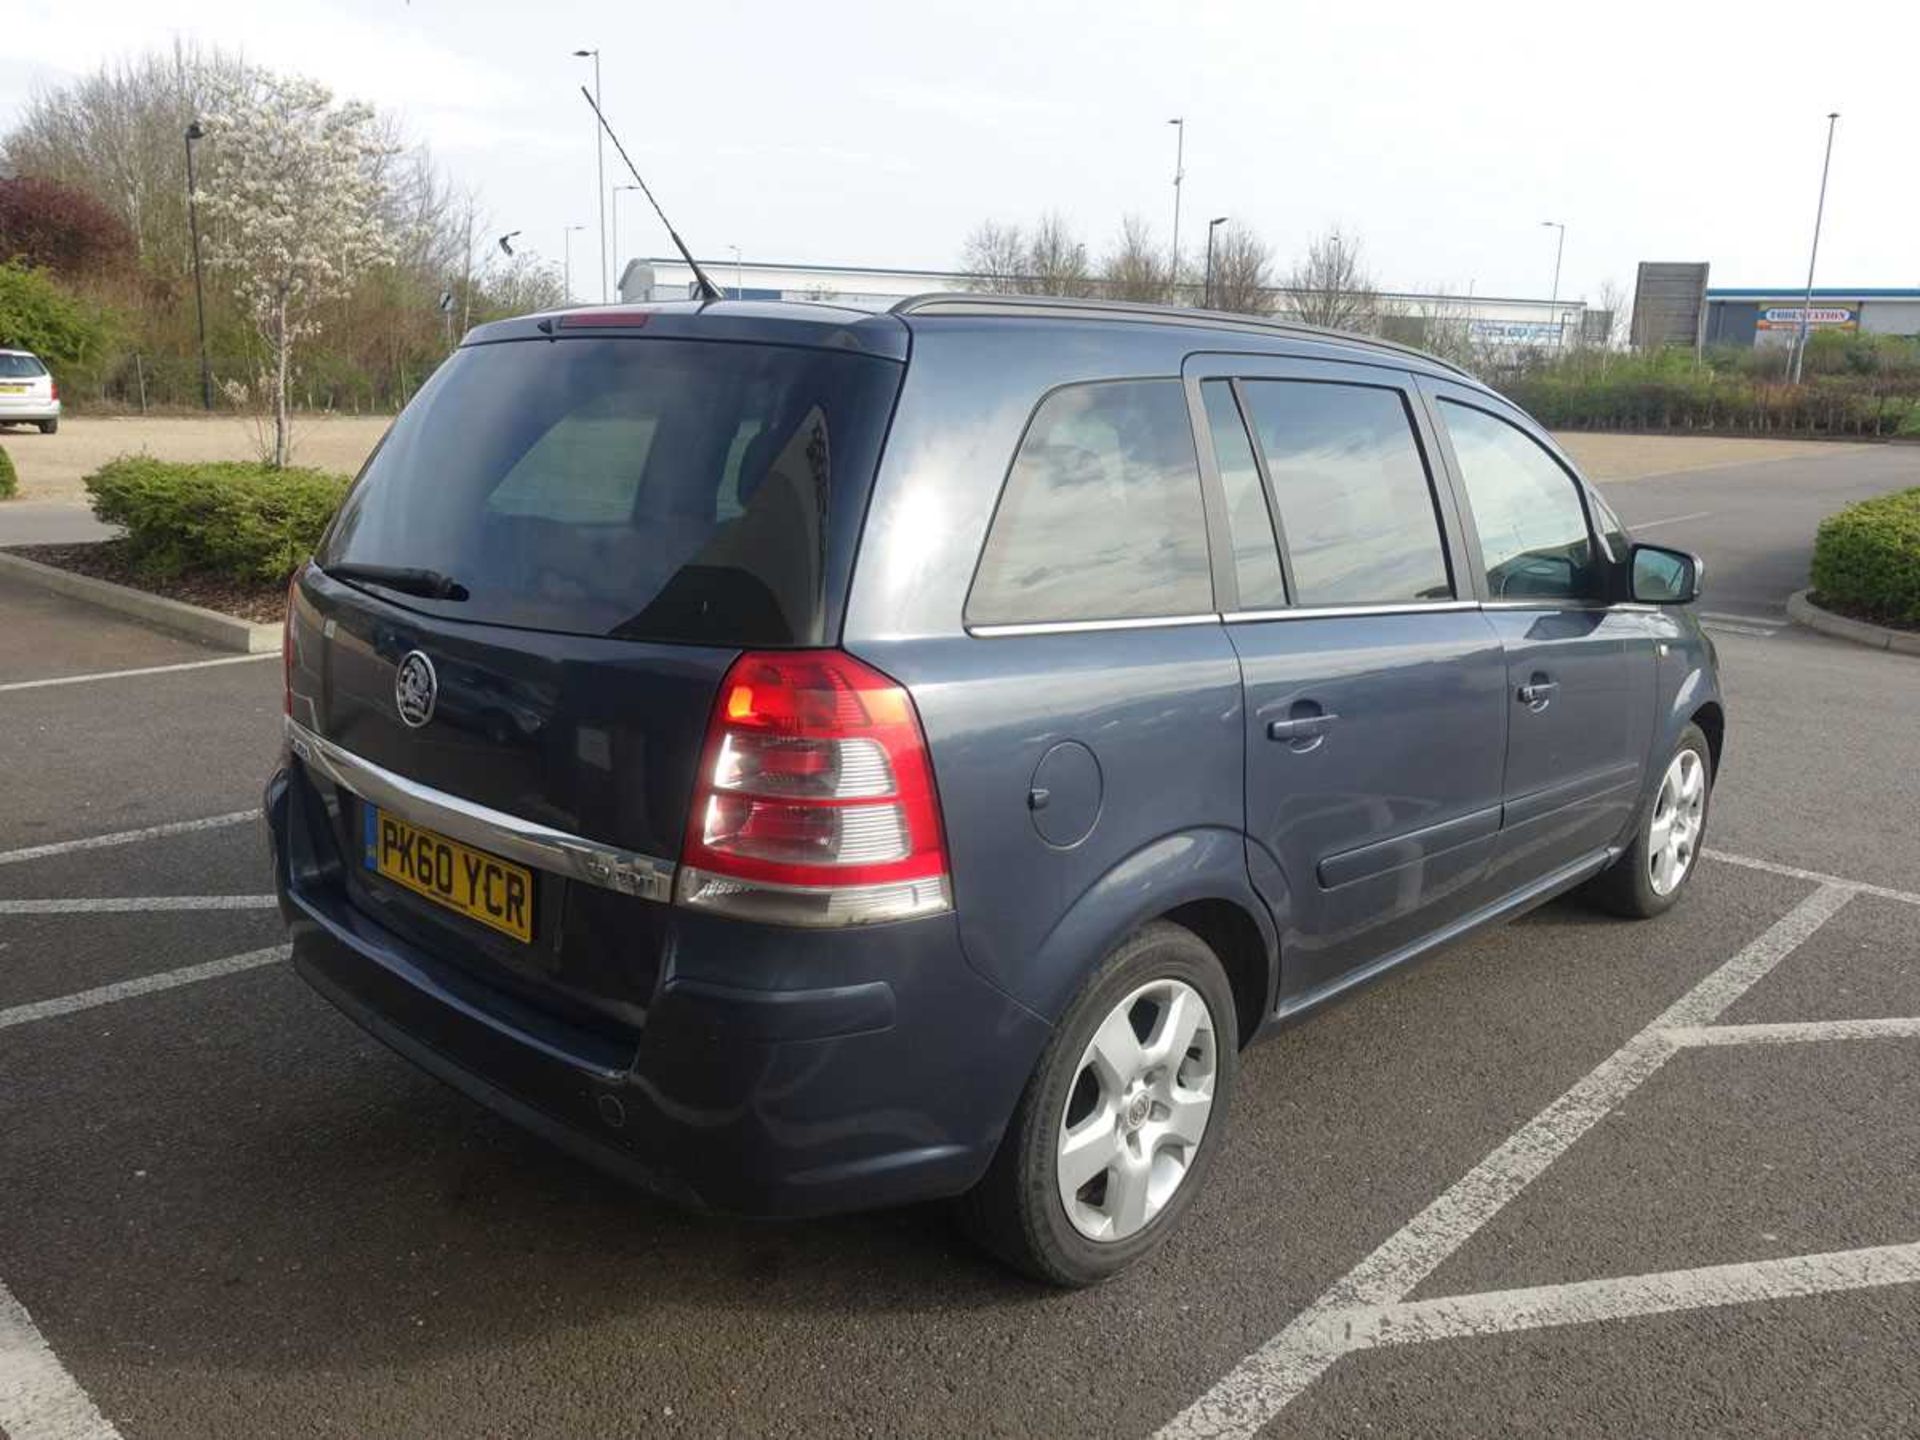 (PK60 YCR) Vauxhall Zafira Exclusiv CDTI auto in blue, first registered 29/12/2010, MPV, - Image 5 of 10